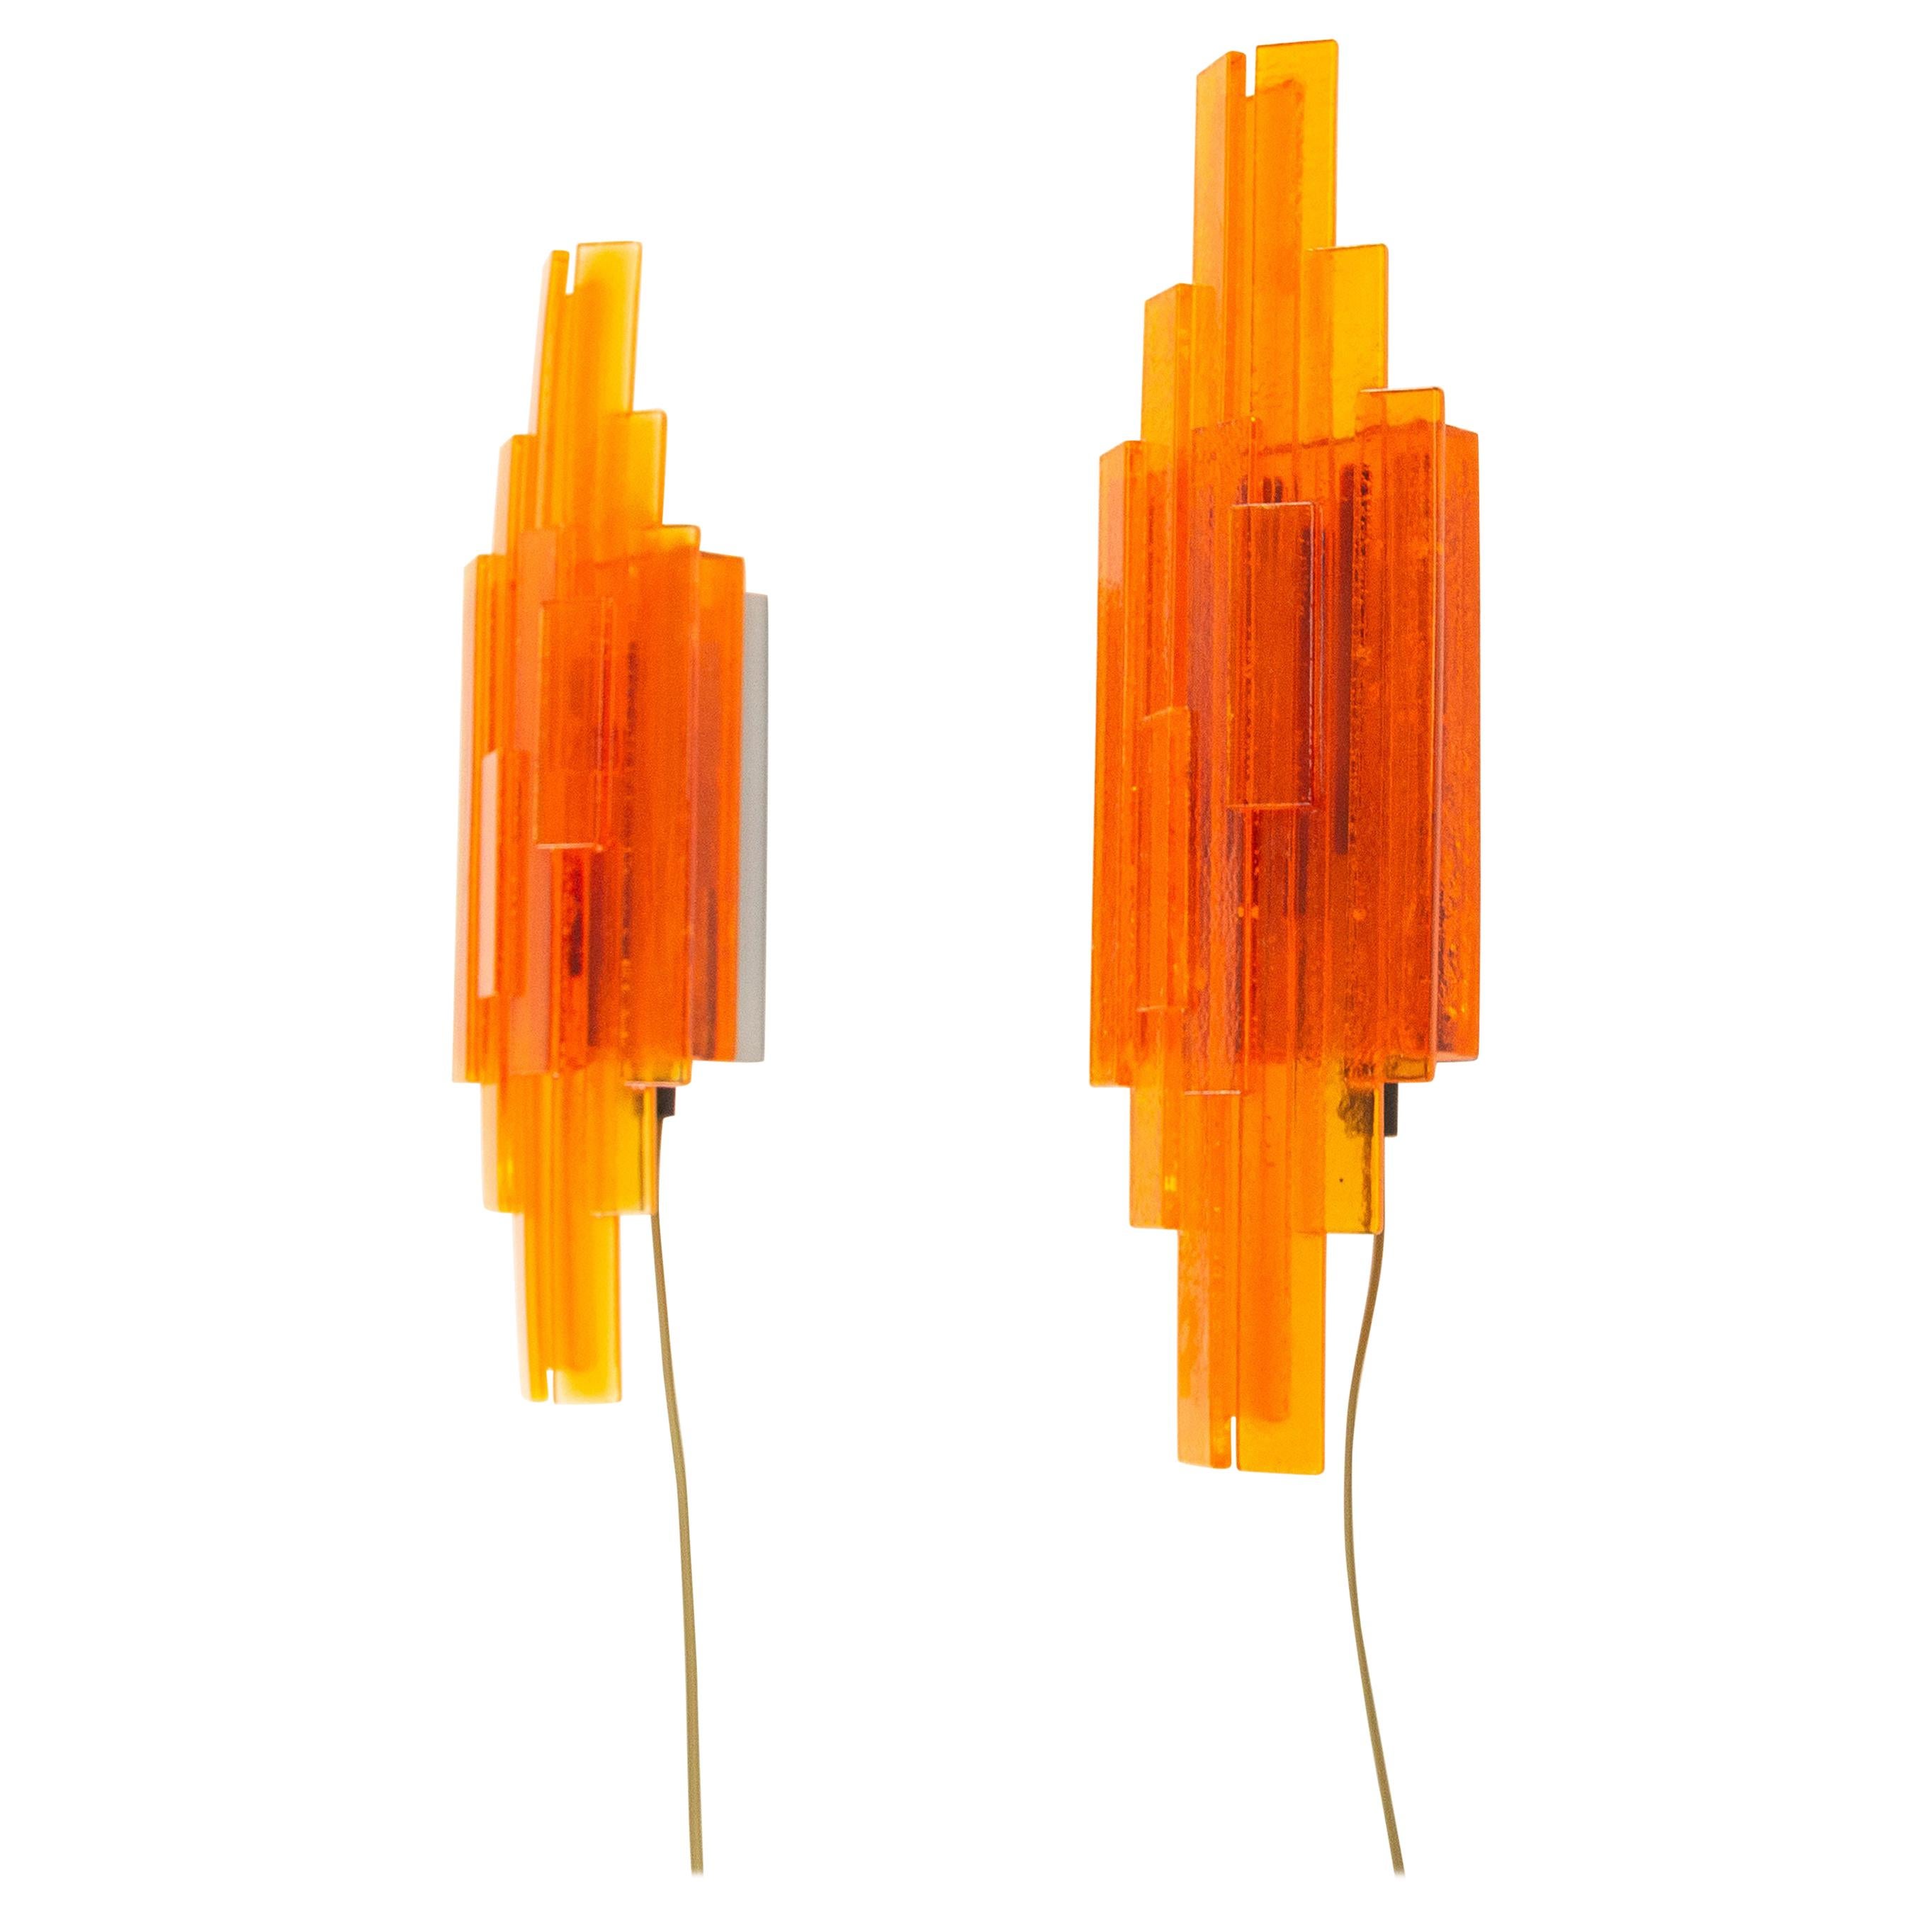 Pair of Orange Wall Lamps by Claus Bolby for Cebo Industri, 1960s